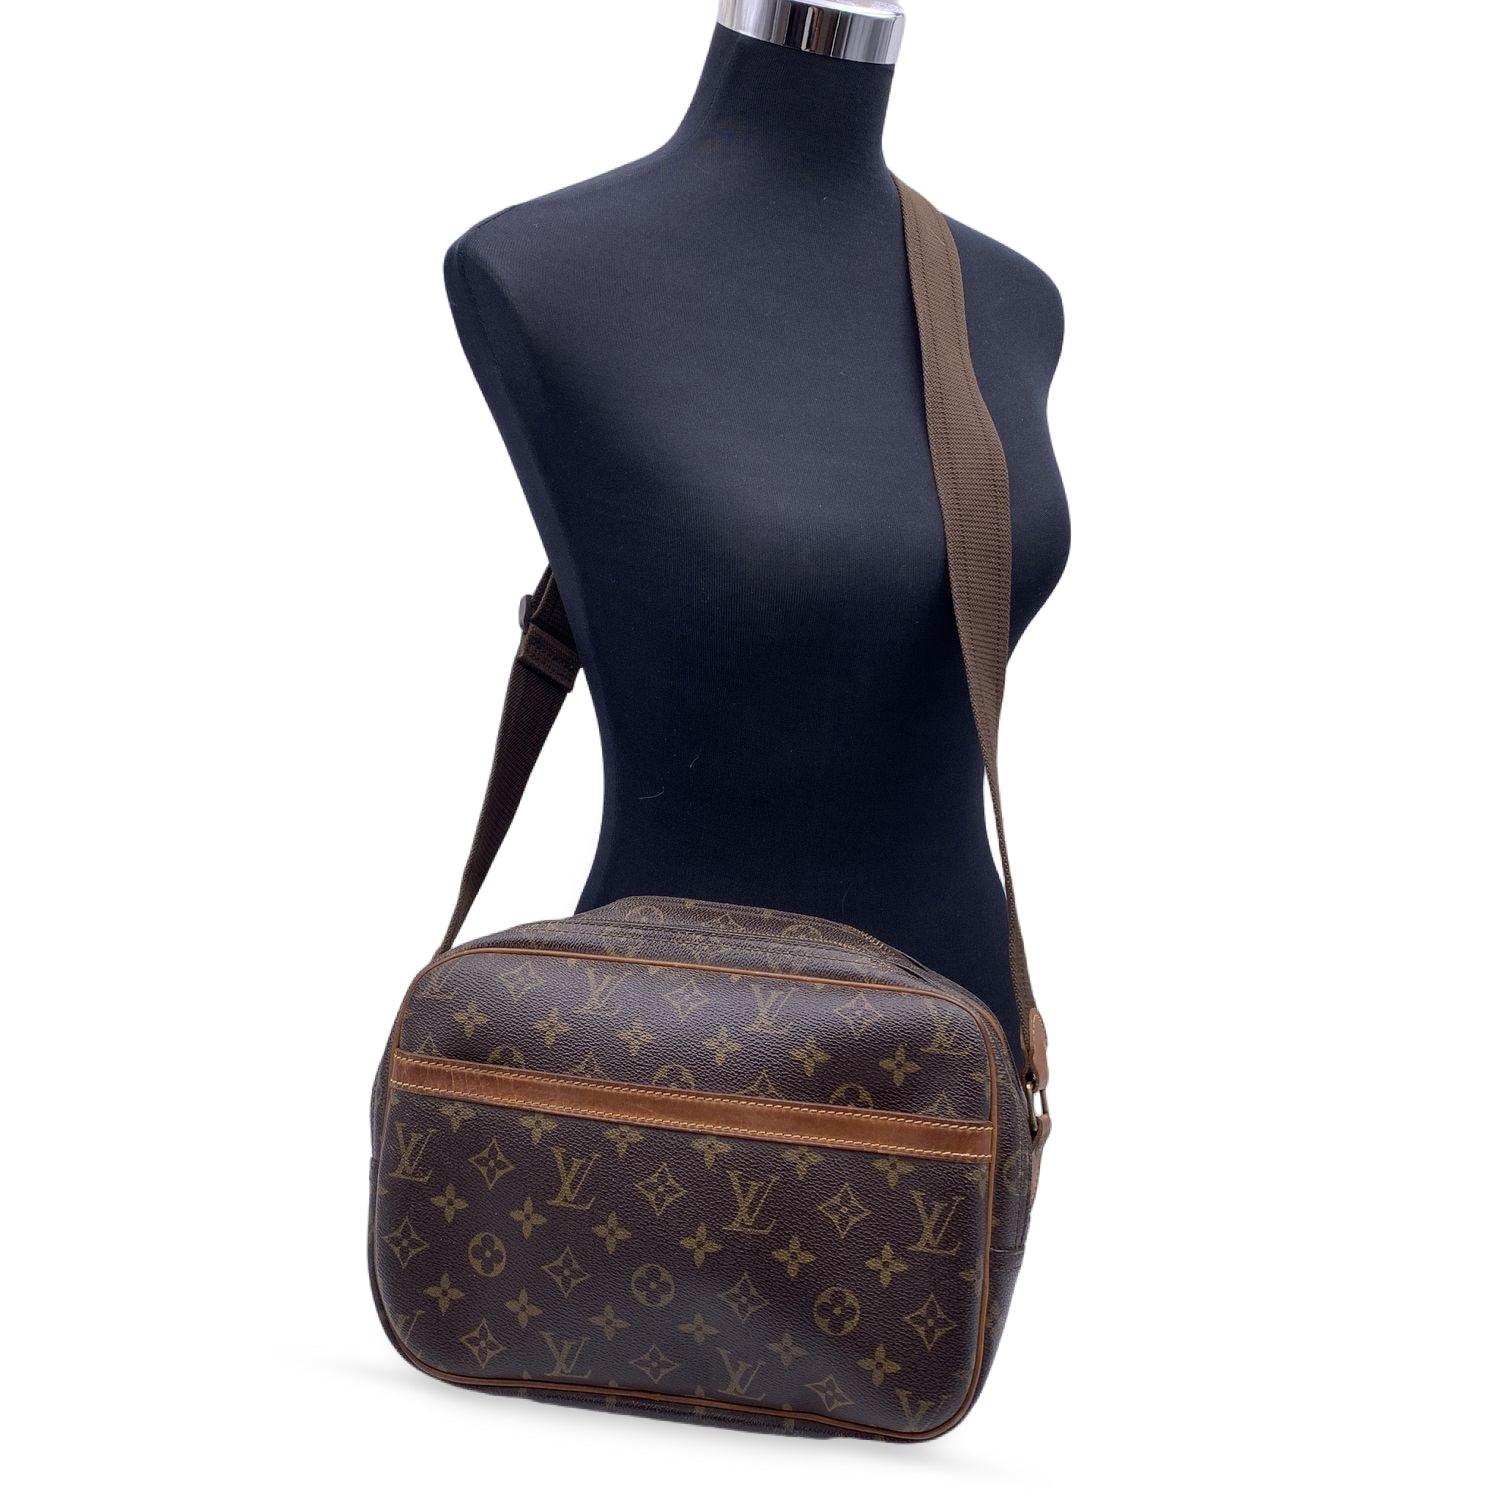 LOUIS VUITTON 'Reporter PM' crafted in timeless monogram canvas with vacchetta leather trim. It features 1 large open pocket on the front. Golden brass hardware and adjustable canvas shoulder strap. 2 main compartments with zip closure. Inside it